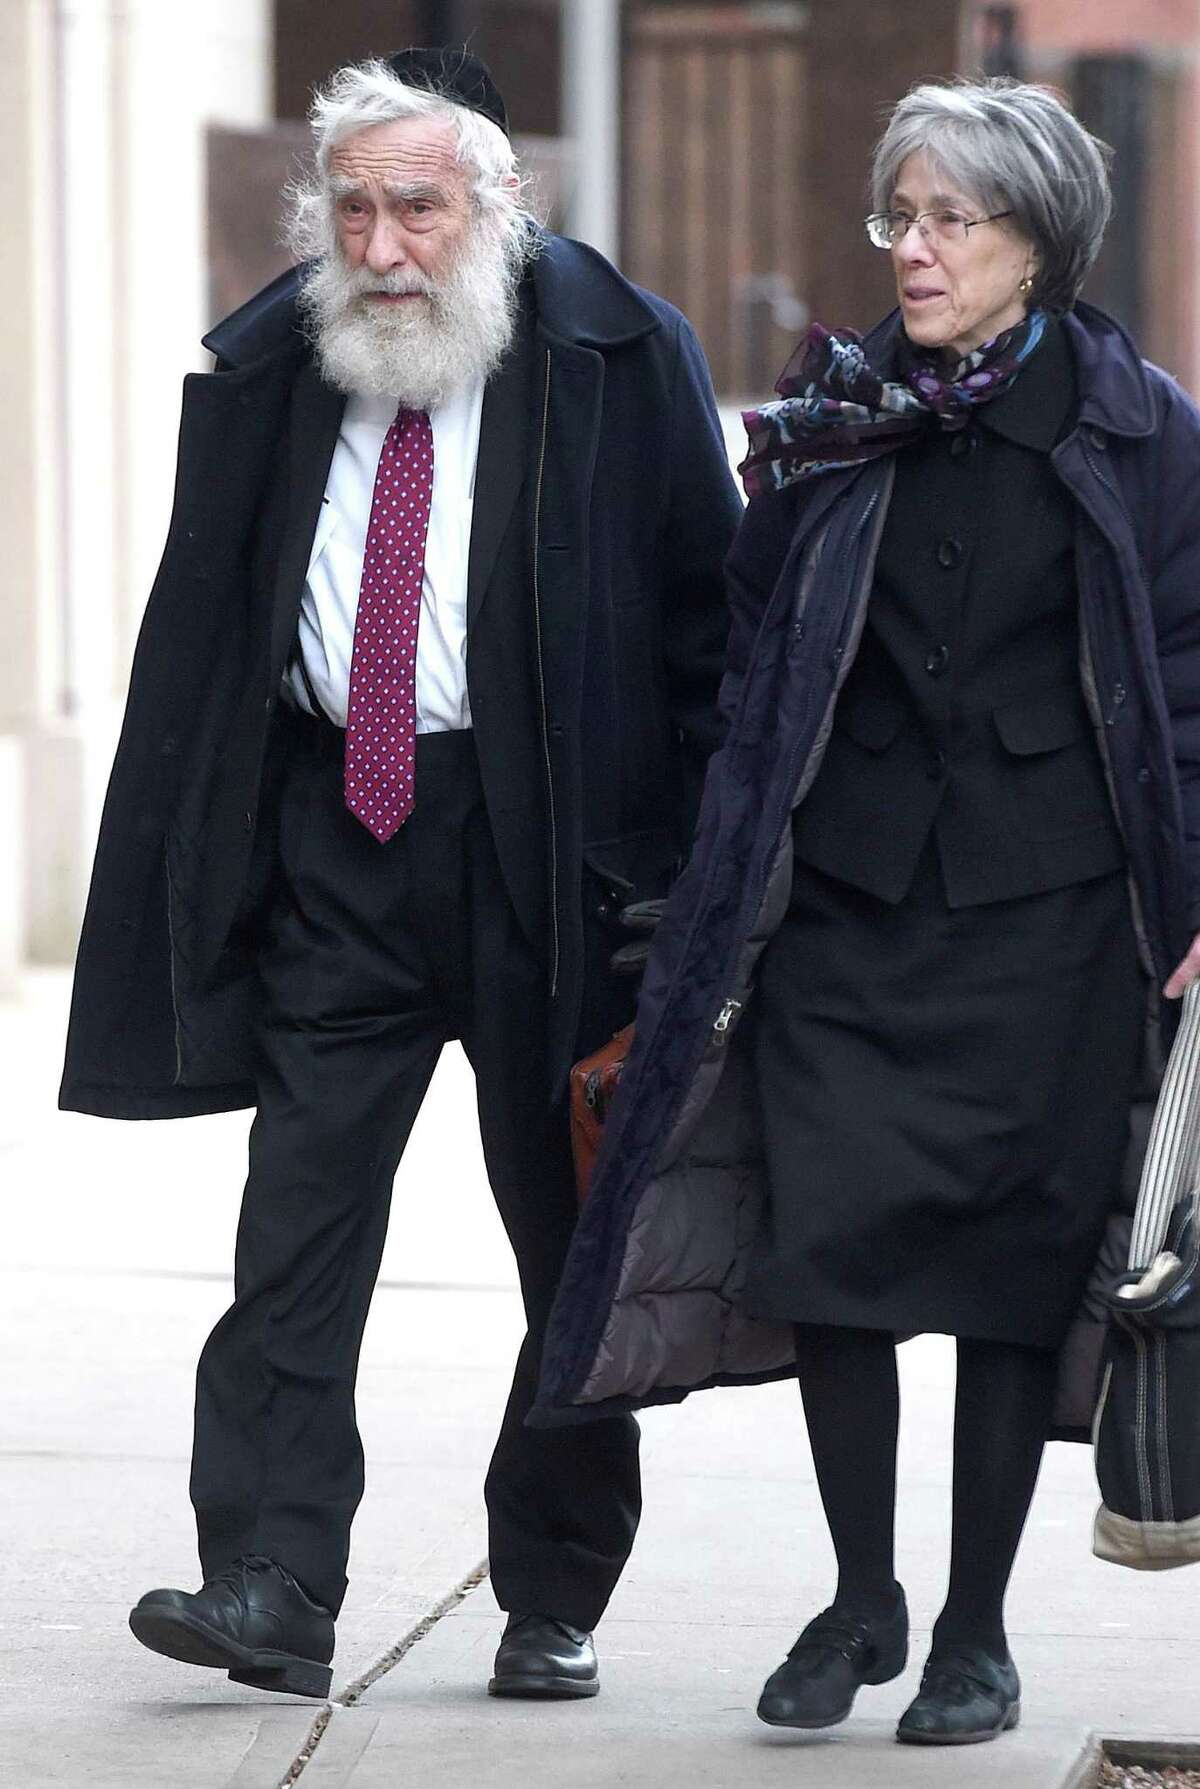 Rabbi Daniel Greer walks to New Haven Superior Court with his wife, Sarah, in New Haven on November 20, 2019.